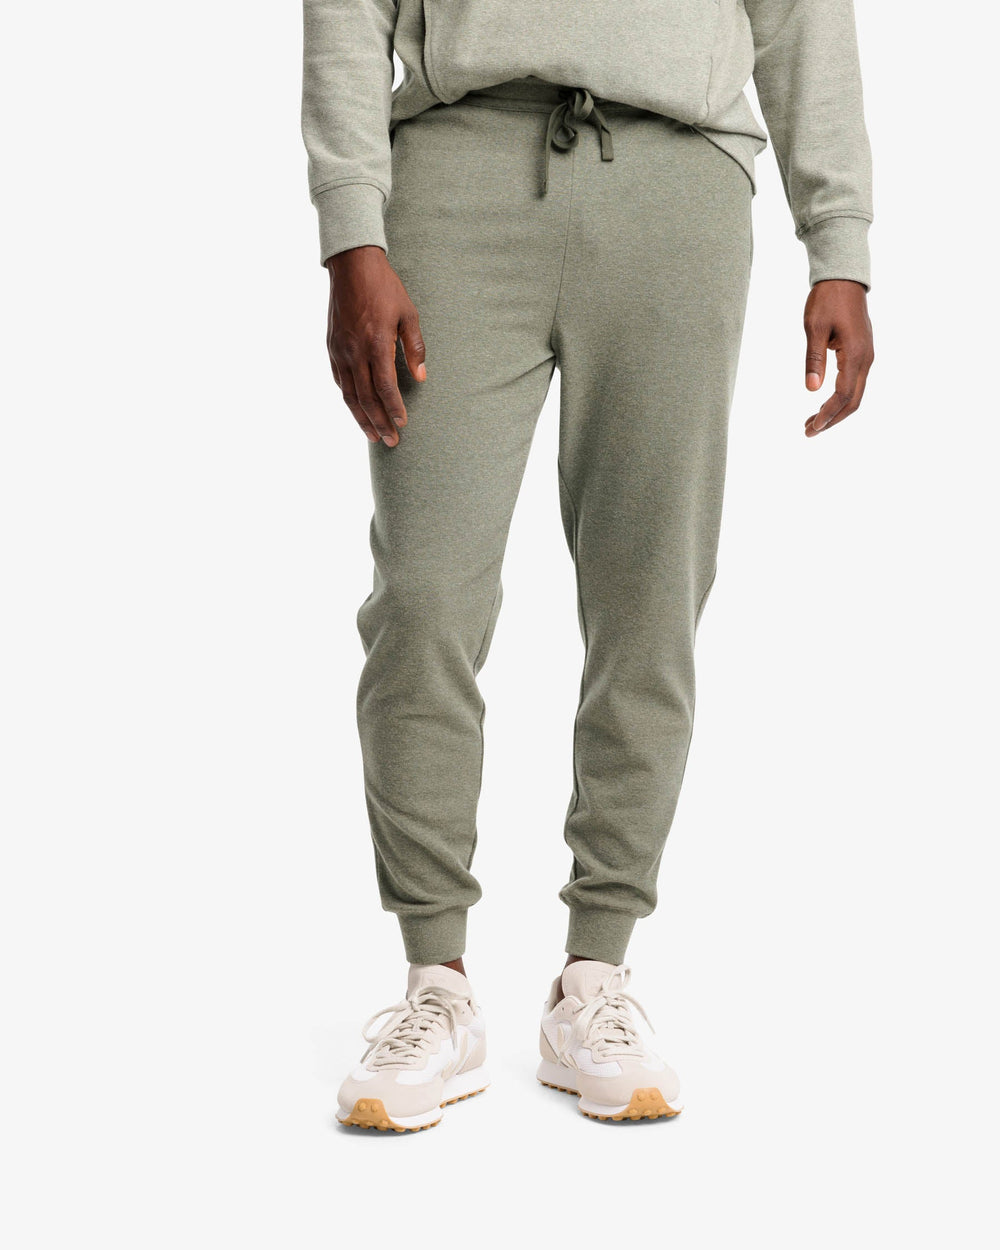 The front view of the Backrush Heather Jogger by Southern Tide - Heather Hunter Green